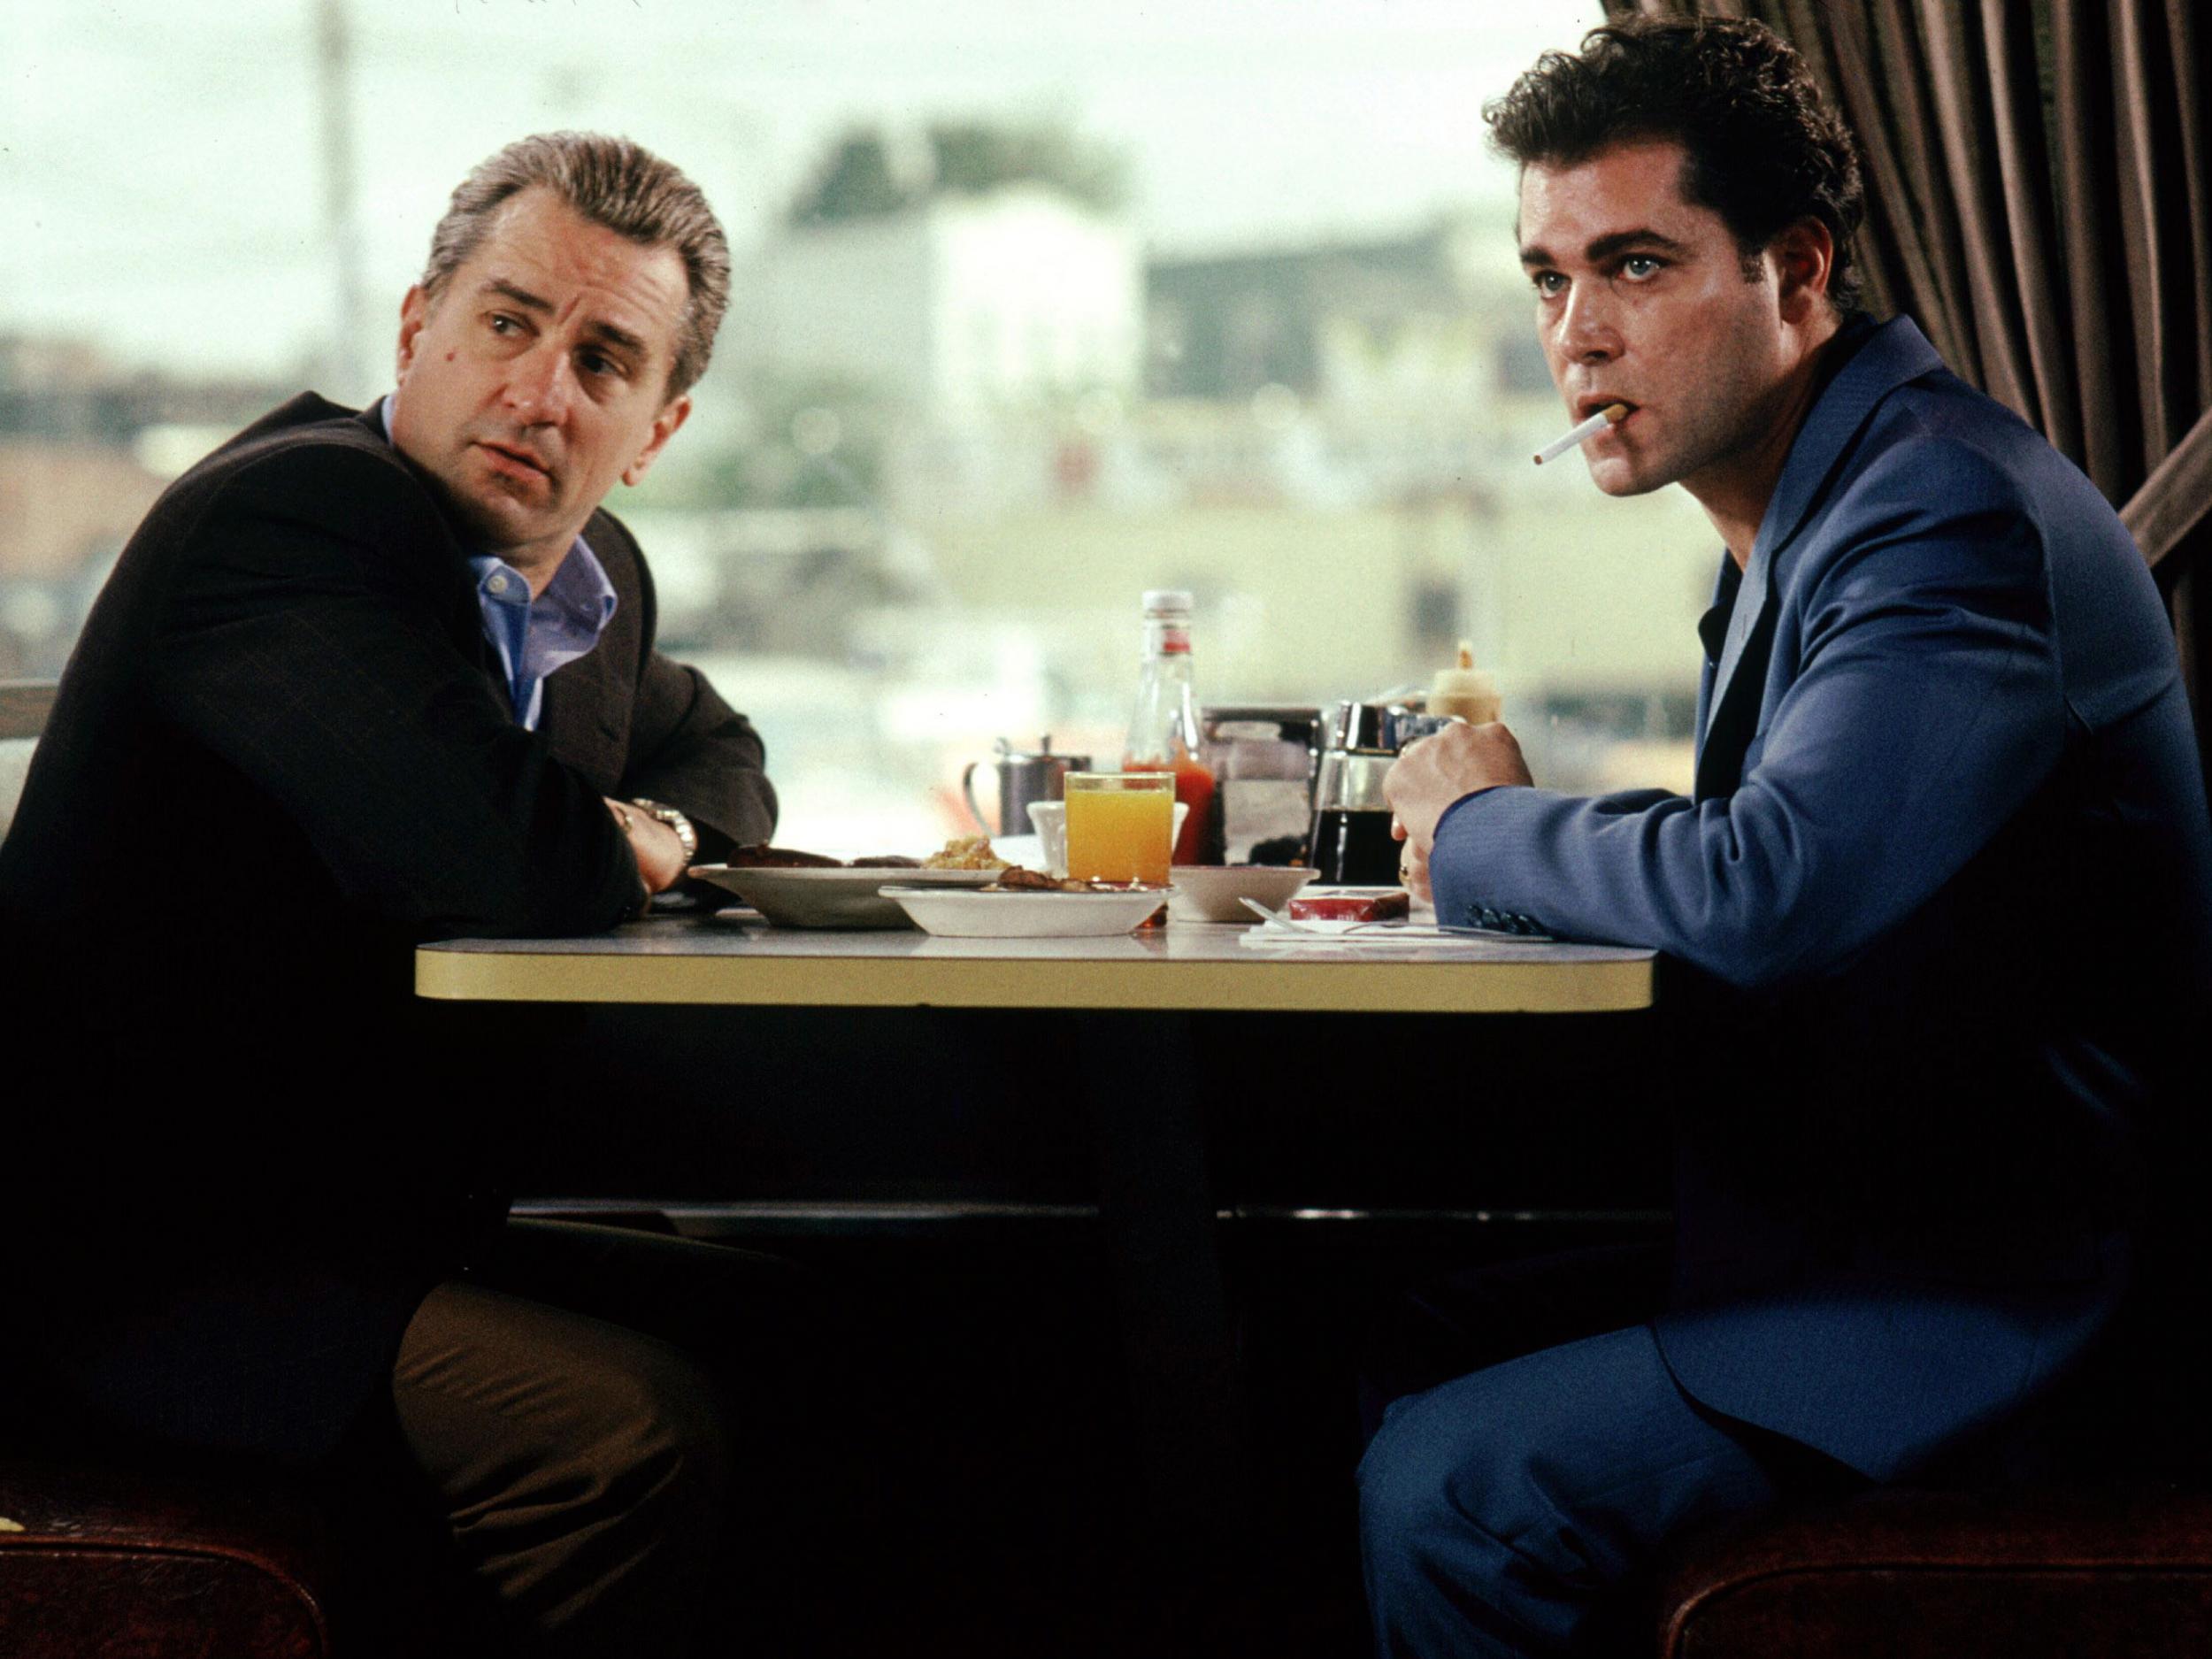 Does watching gangster-style movies such as Goodfellas make crime more or less attractive?